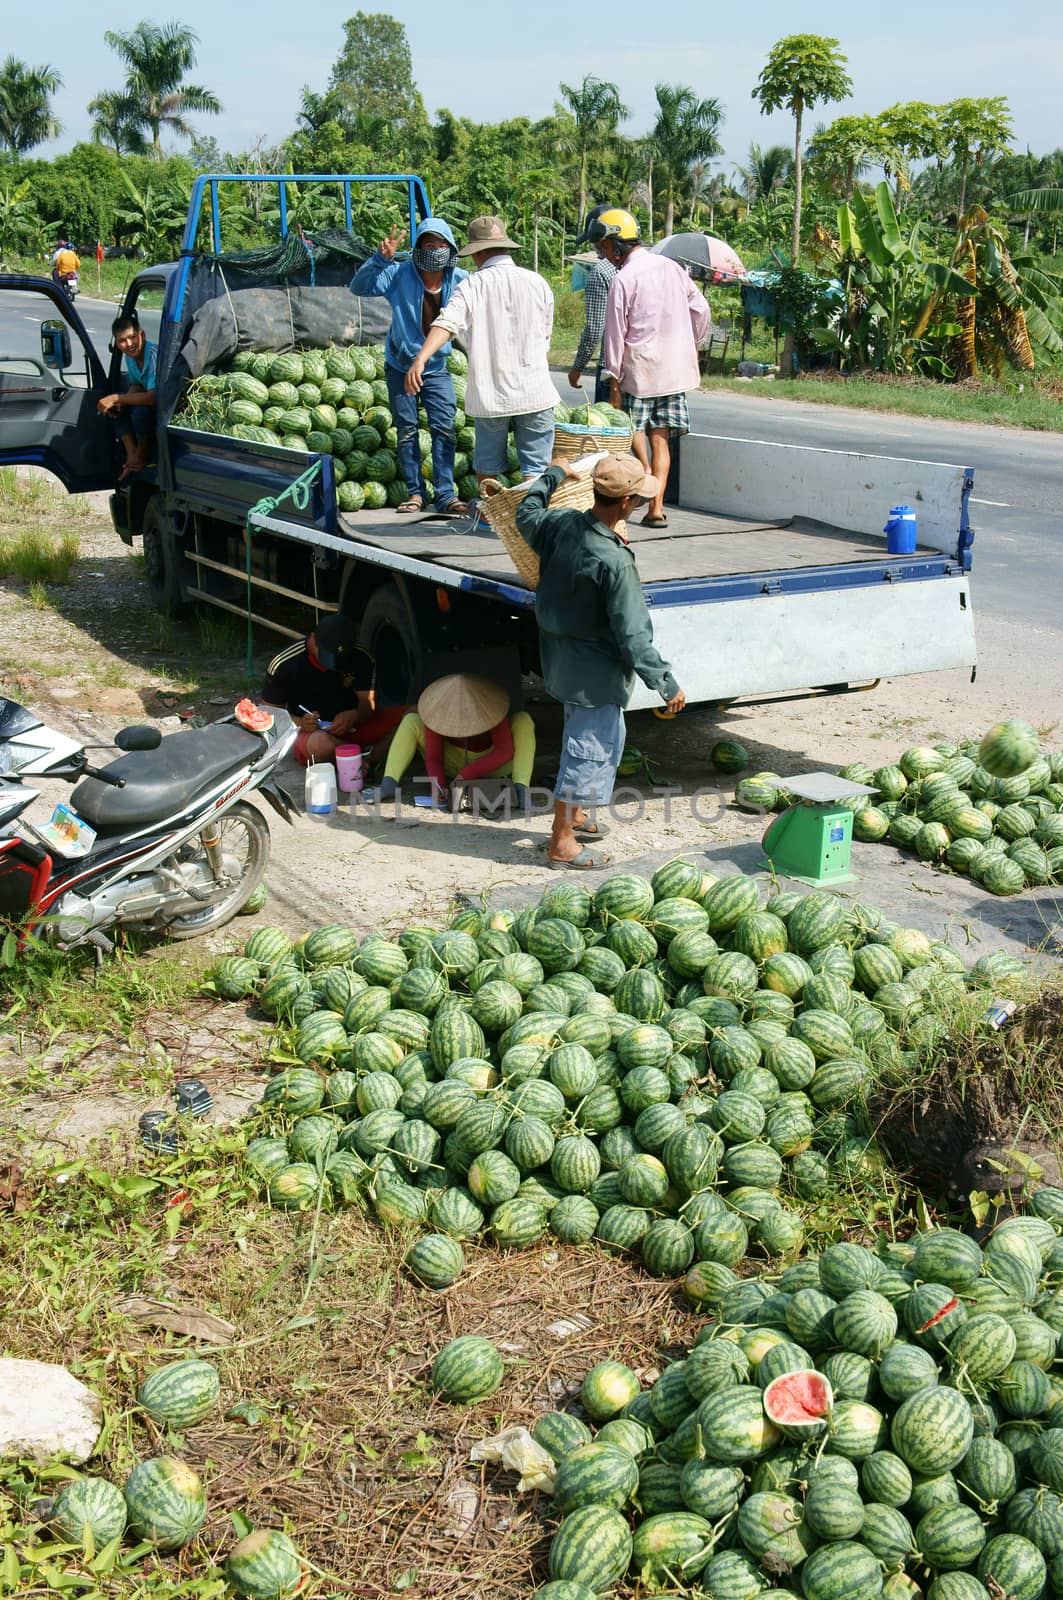 DONG THAP, VIET NAM- JULY 27: Group of Asian farmer working on agriculture field, Vietnamese man harvesting watermelon on water melon plantation to sale for trader, Dongthap, Vietnam, July 27, 2015